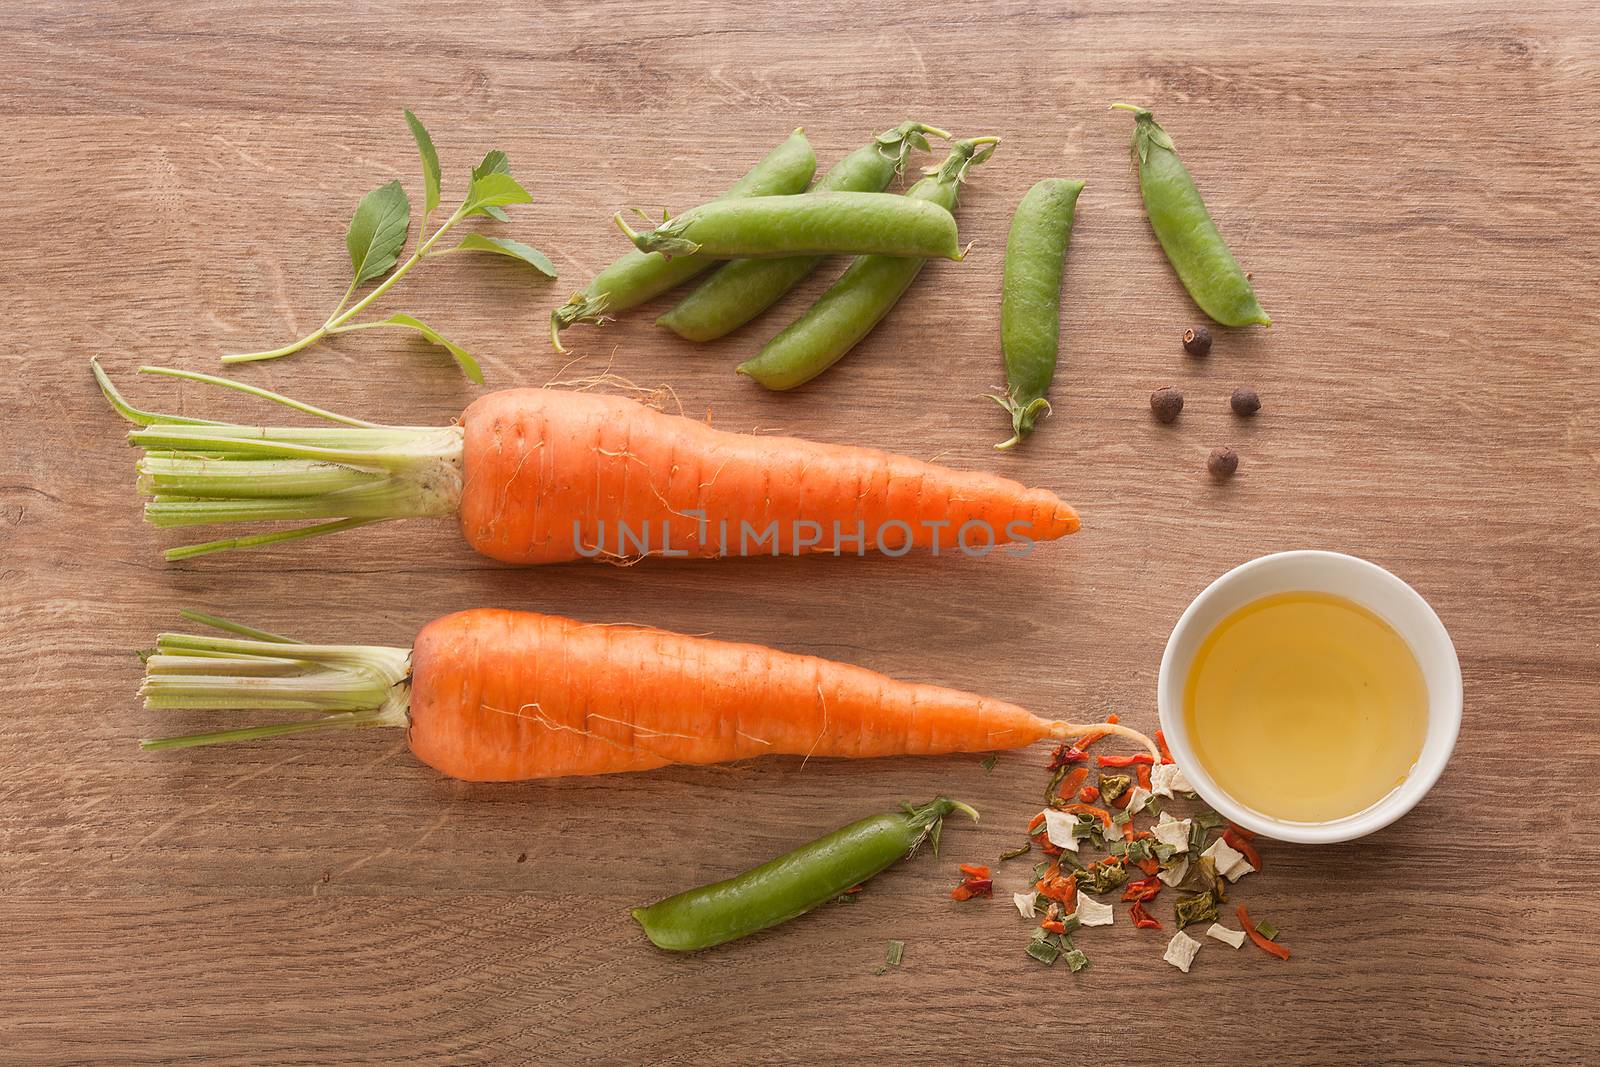 Carrot, peas and oil on the wood by Angorius